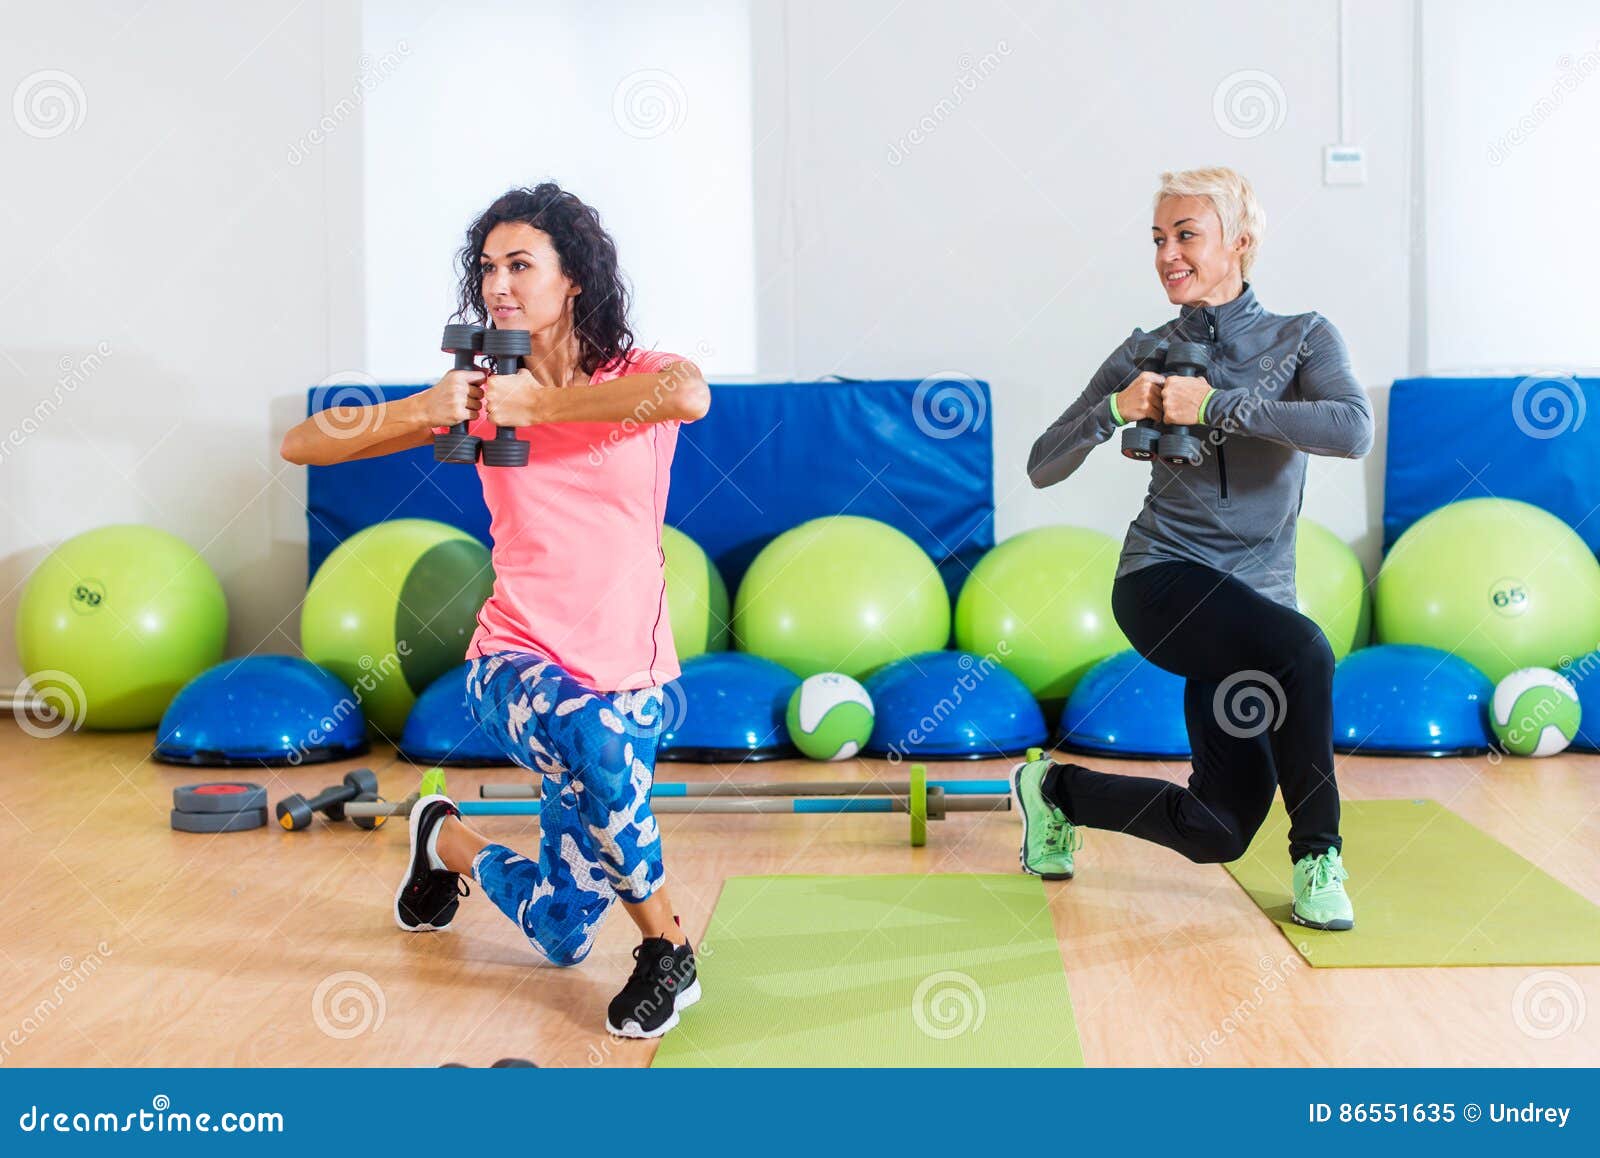 fit female sportswoman doing curtsy lunge exercise with dumbbells in group fitness studio class